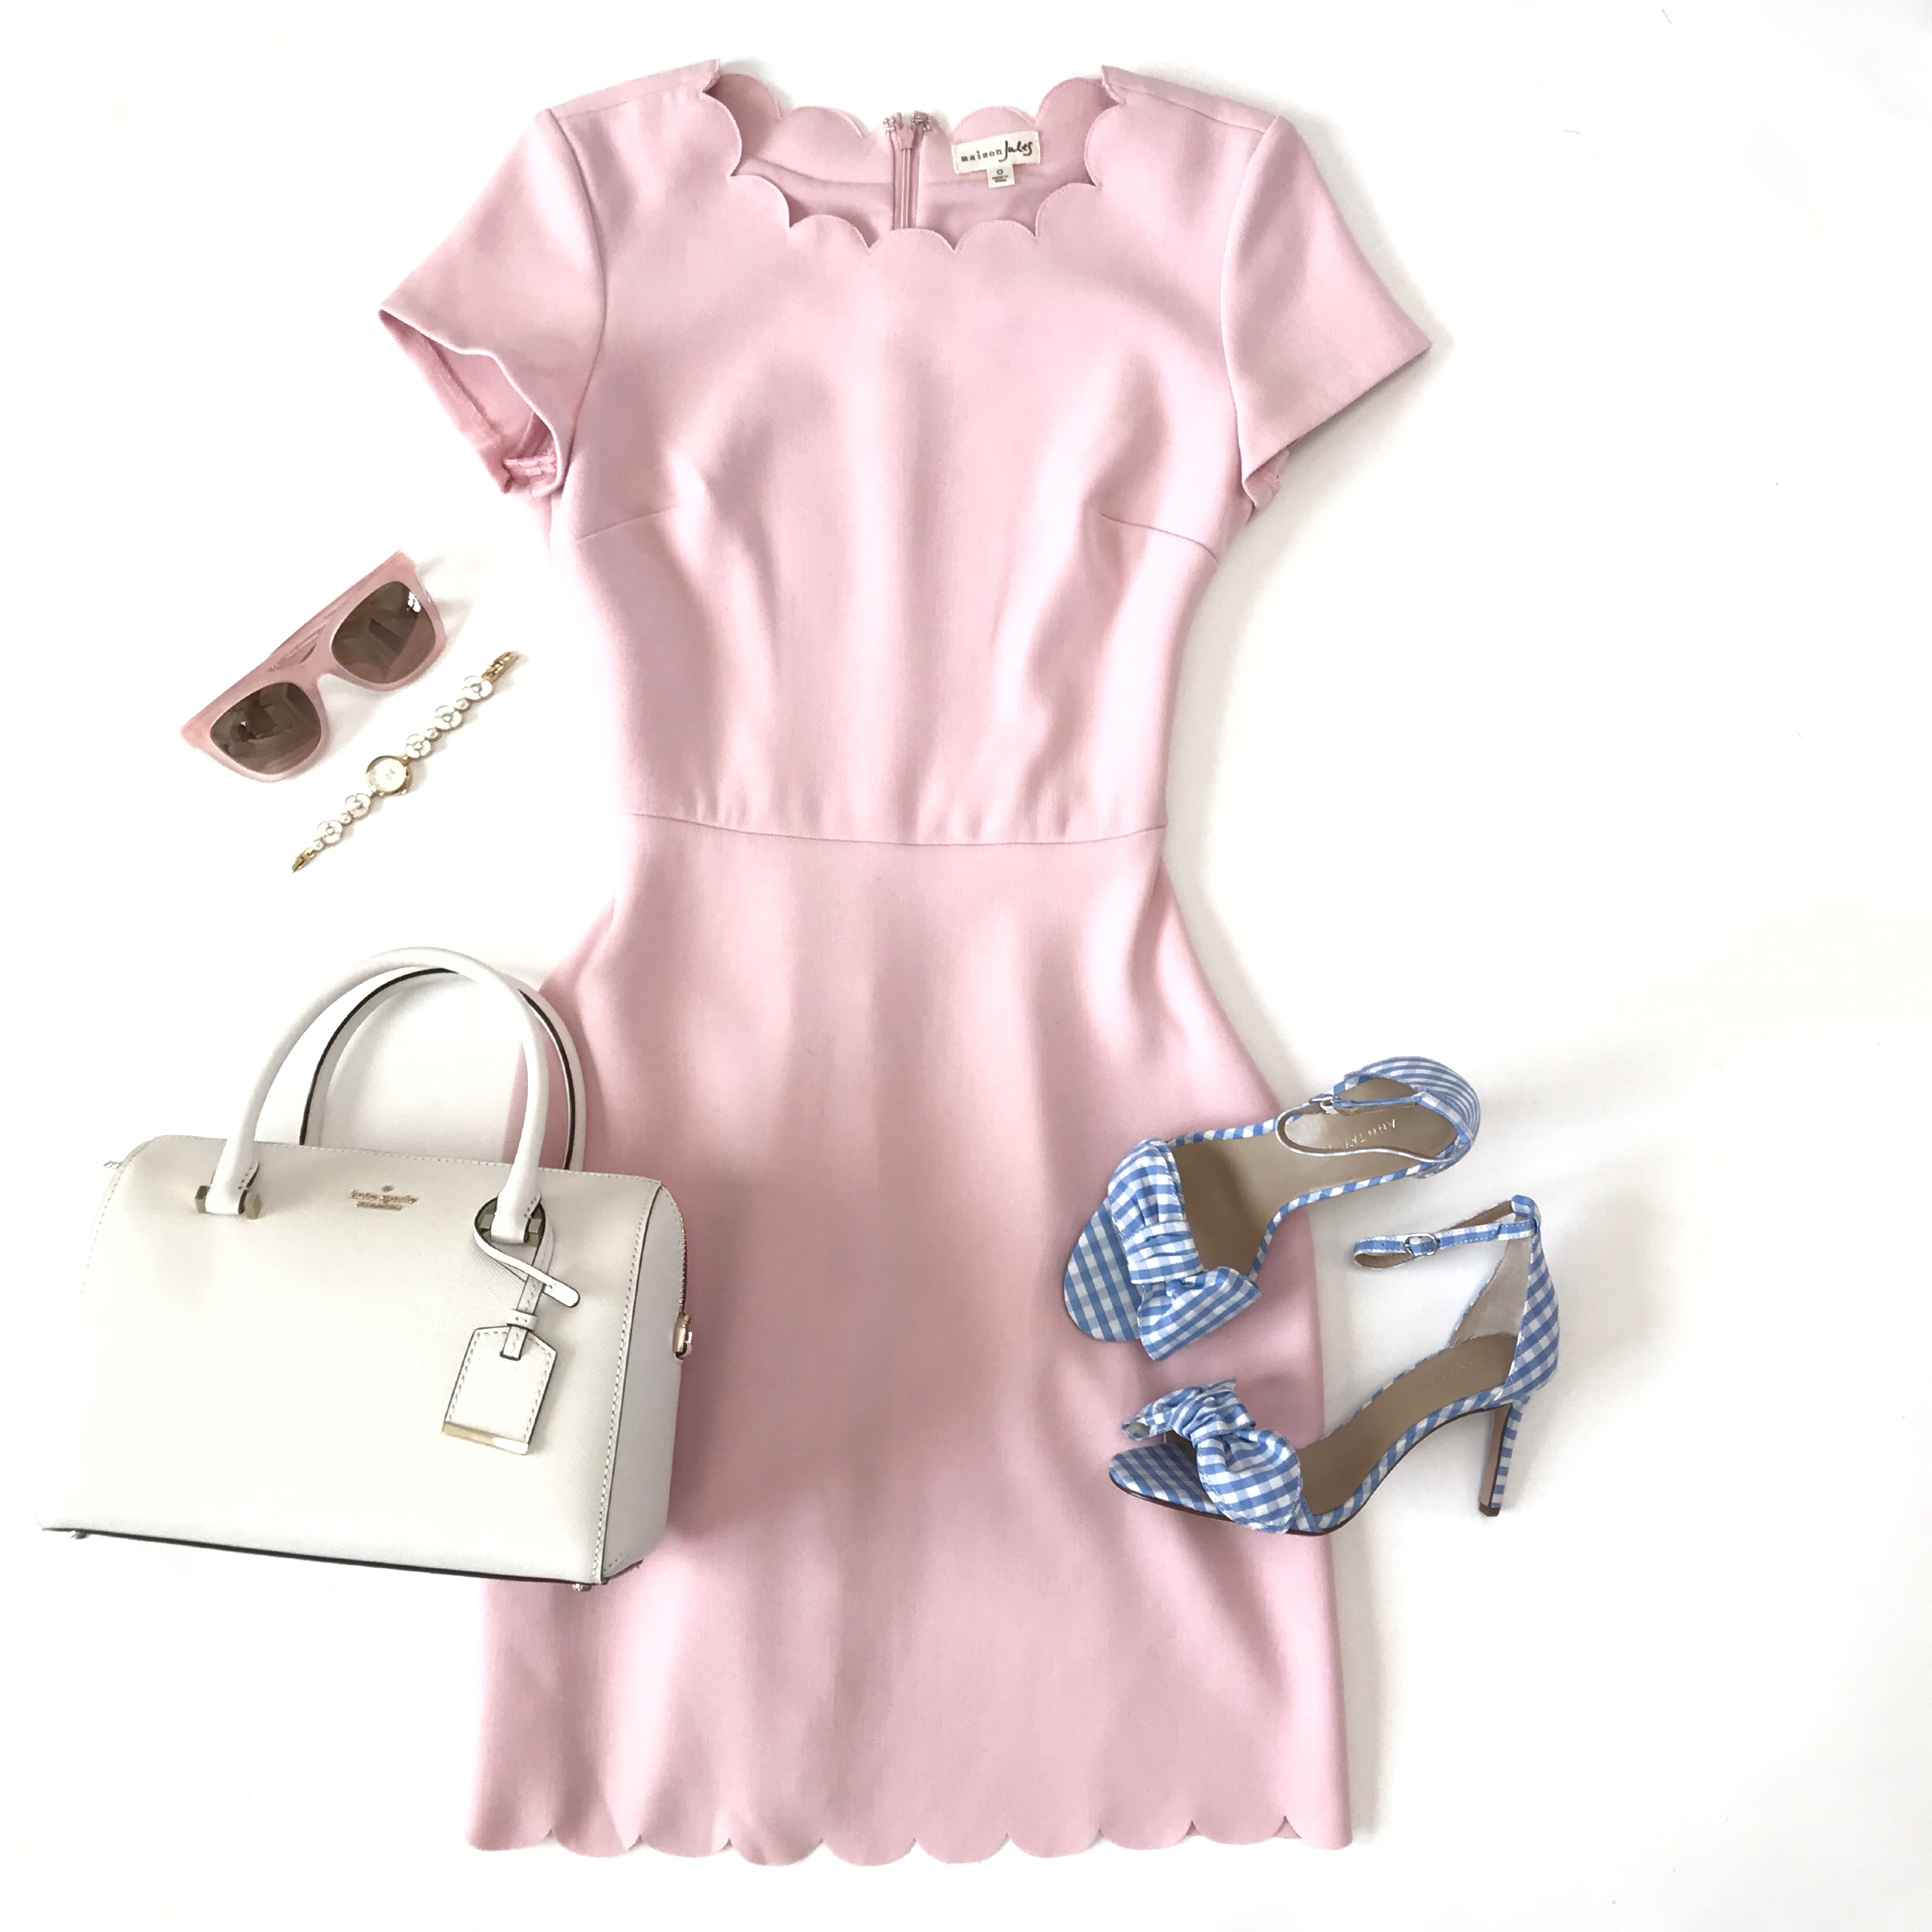 pink scalloped sheath dress gingham bow heels easter outfit